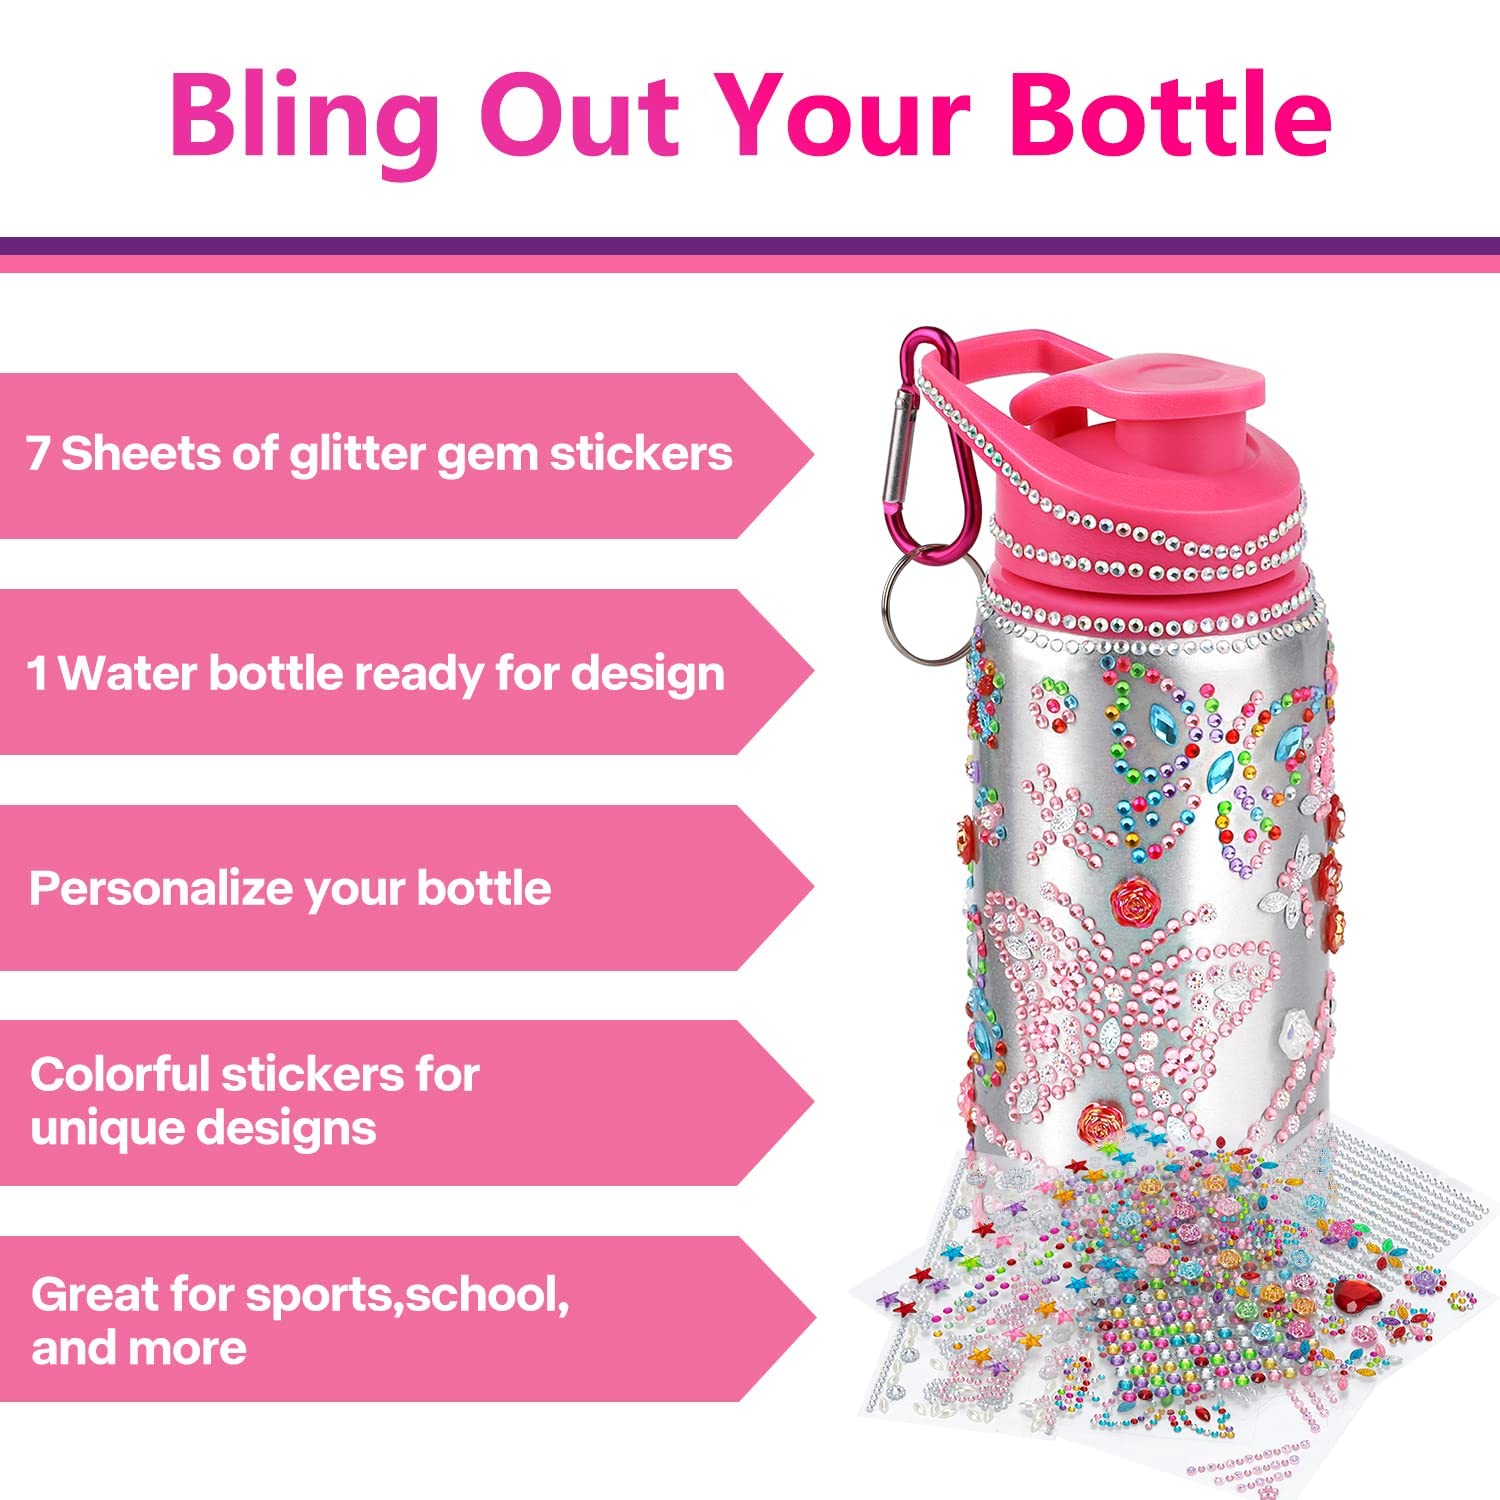 Gifts for Girls, Decorate Personalize Your Own Water Bottles with